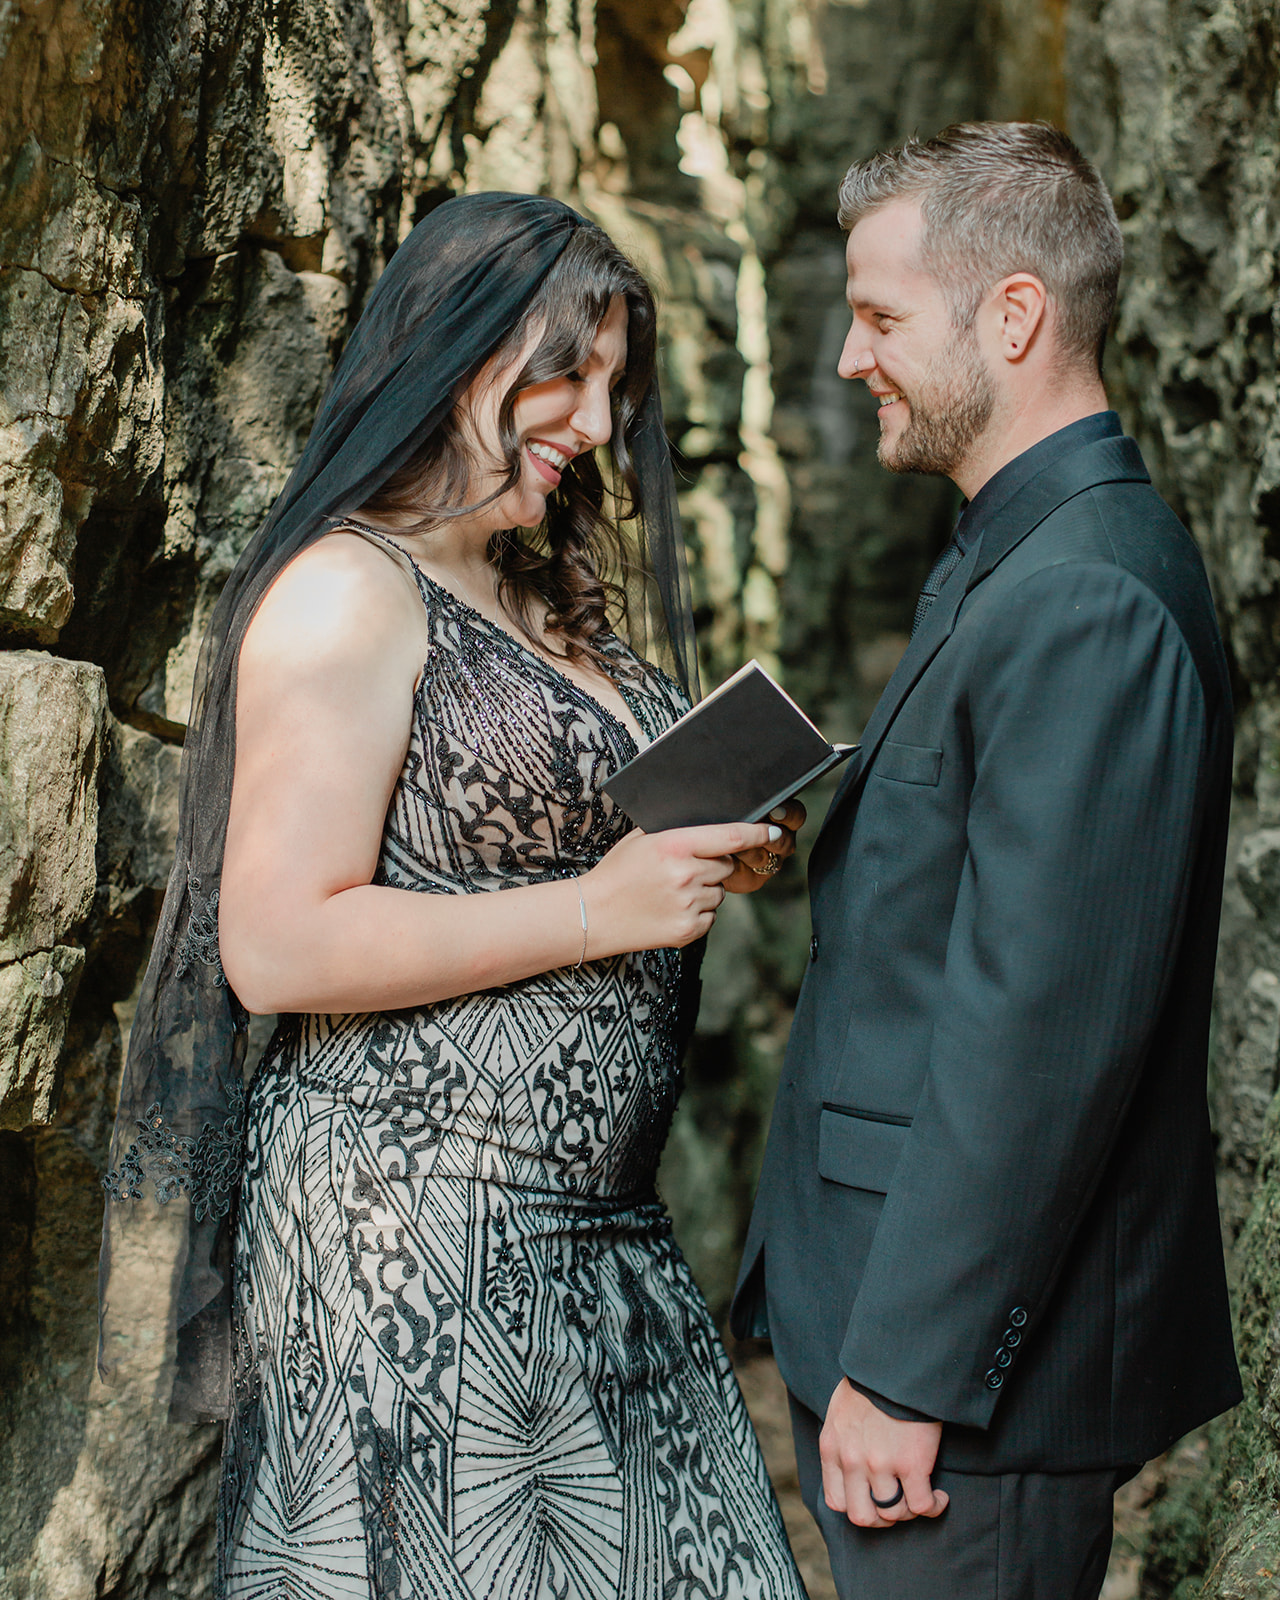 A wedding near Toronto Ontario at a cute cabin in the woods. Enjoy inspiration from this Caledon elopement. 